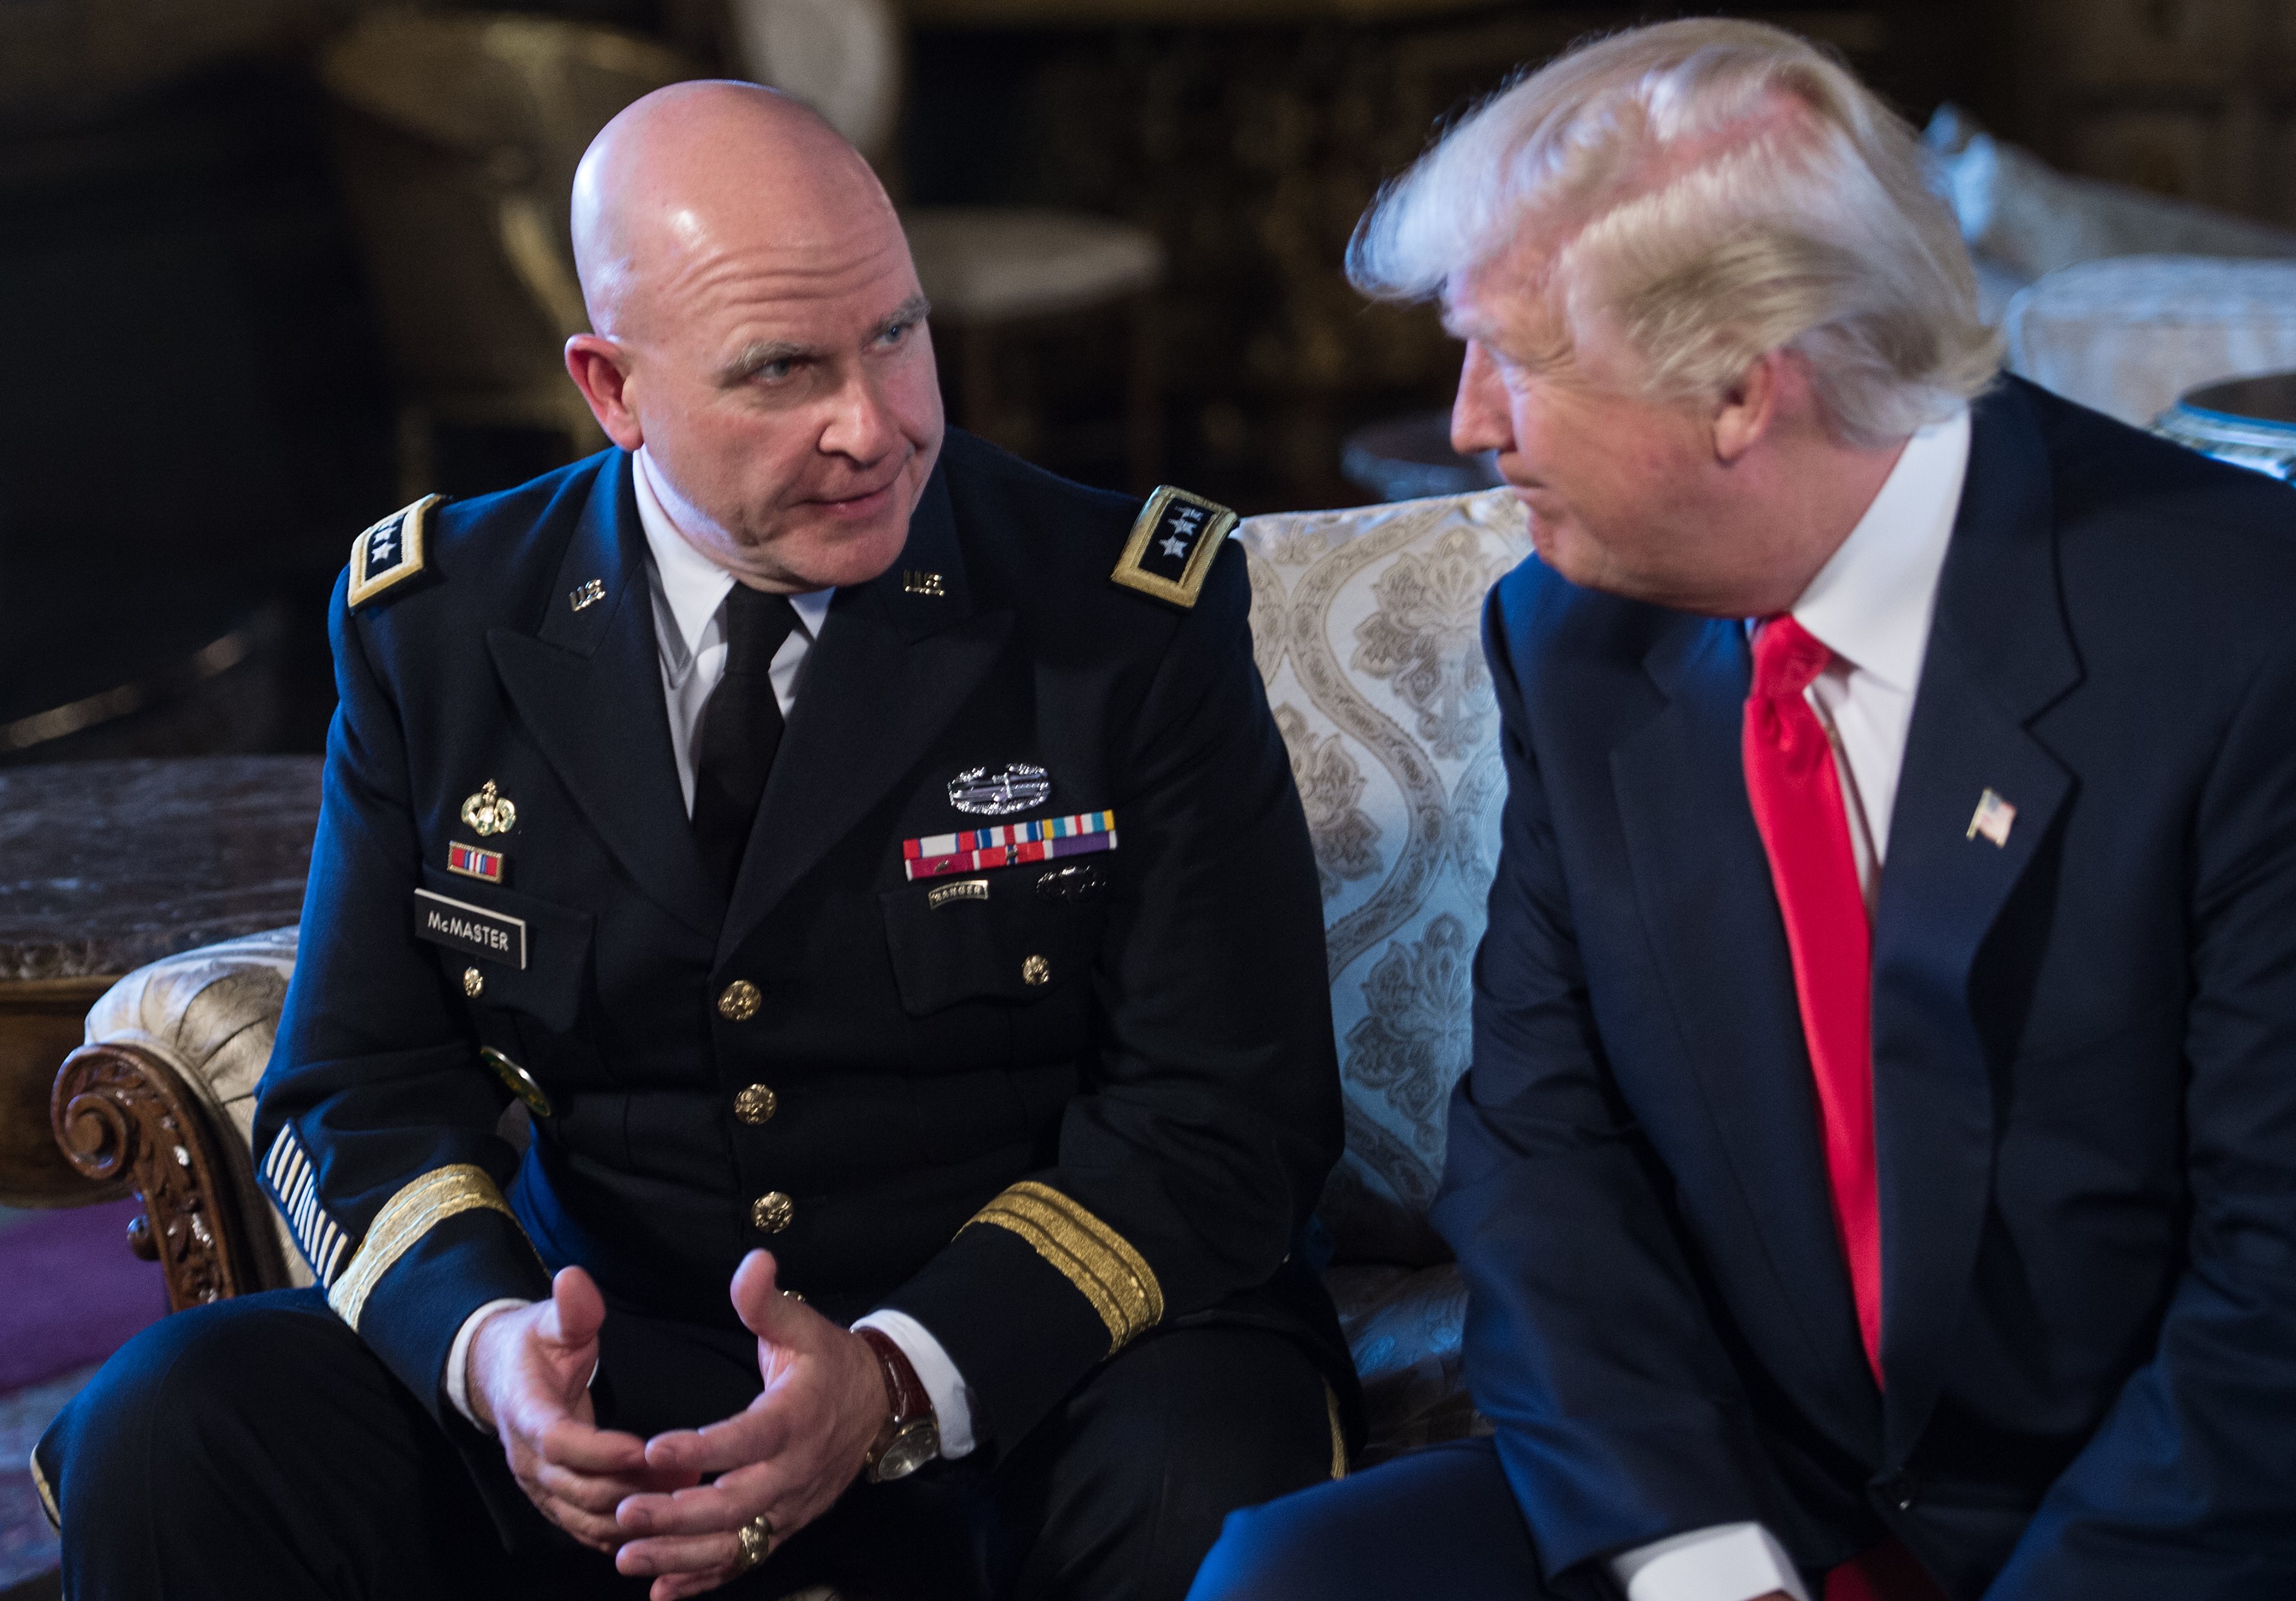 US President Donald Trump announces US Army Lieutenant General H.R. McMaster (L) as his national security adviser at his Mar-a-Lago resort in Palm Beach, Florida, on February 20, 2017. (NICHOLAS KAMM&mdash;AFP/Getty Images)